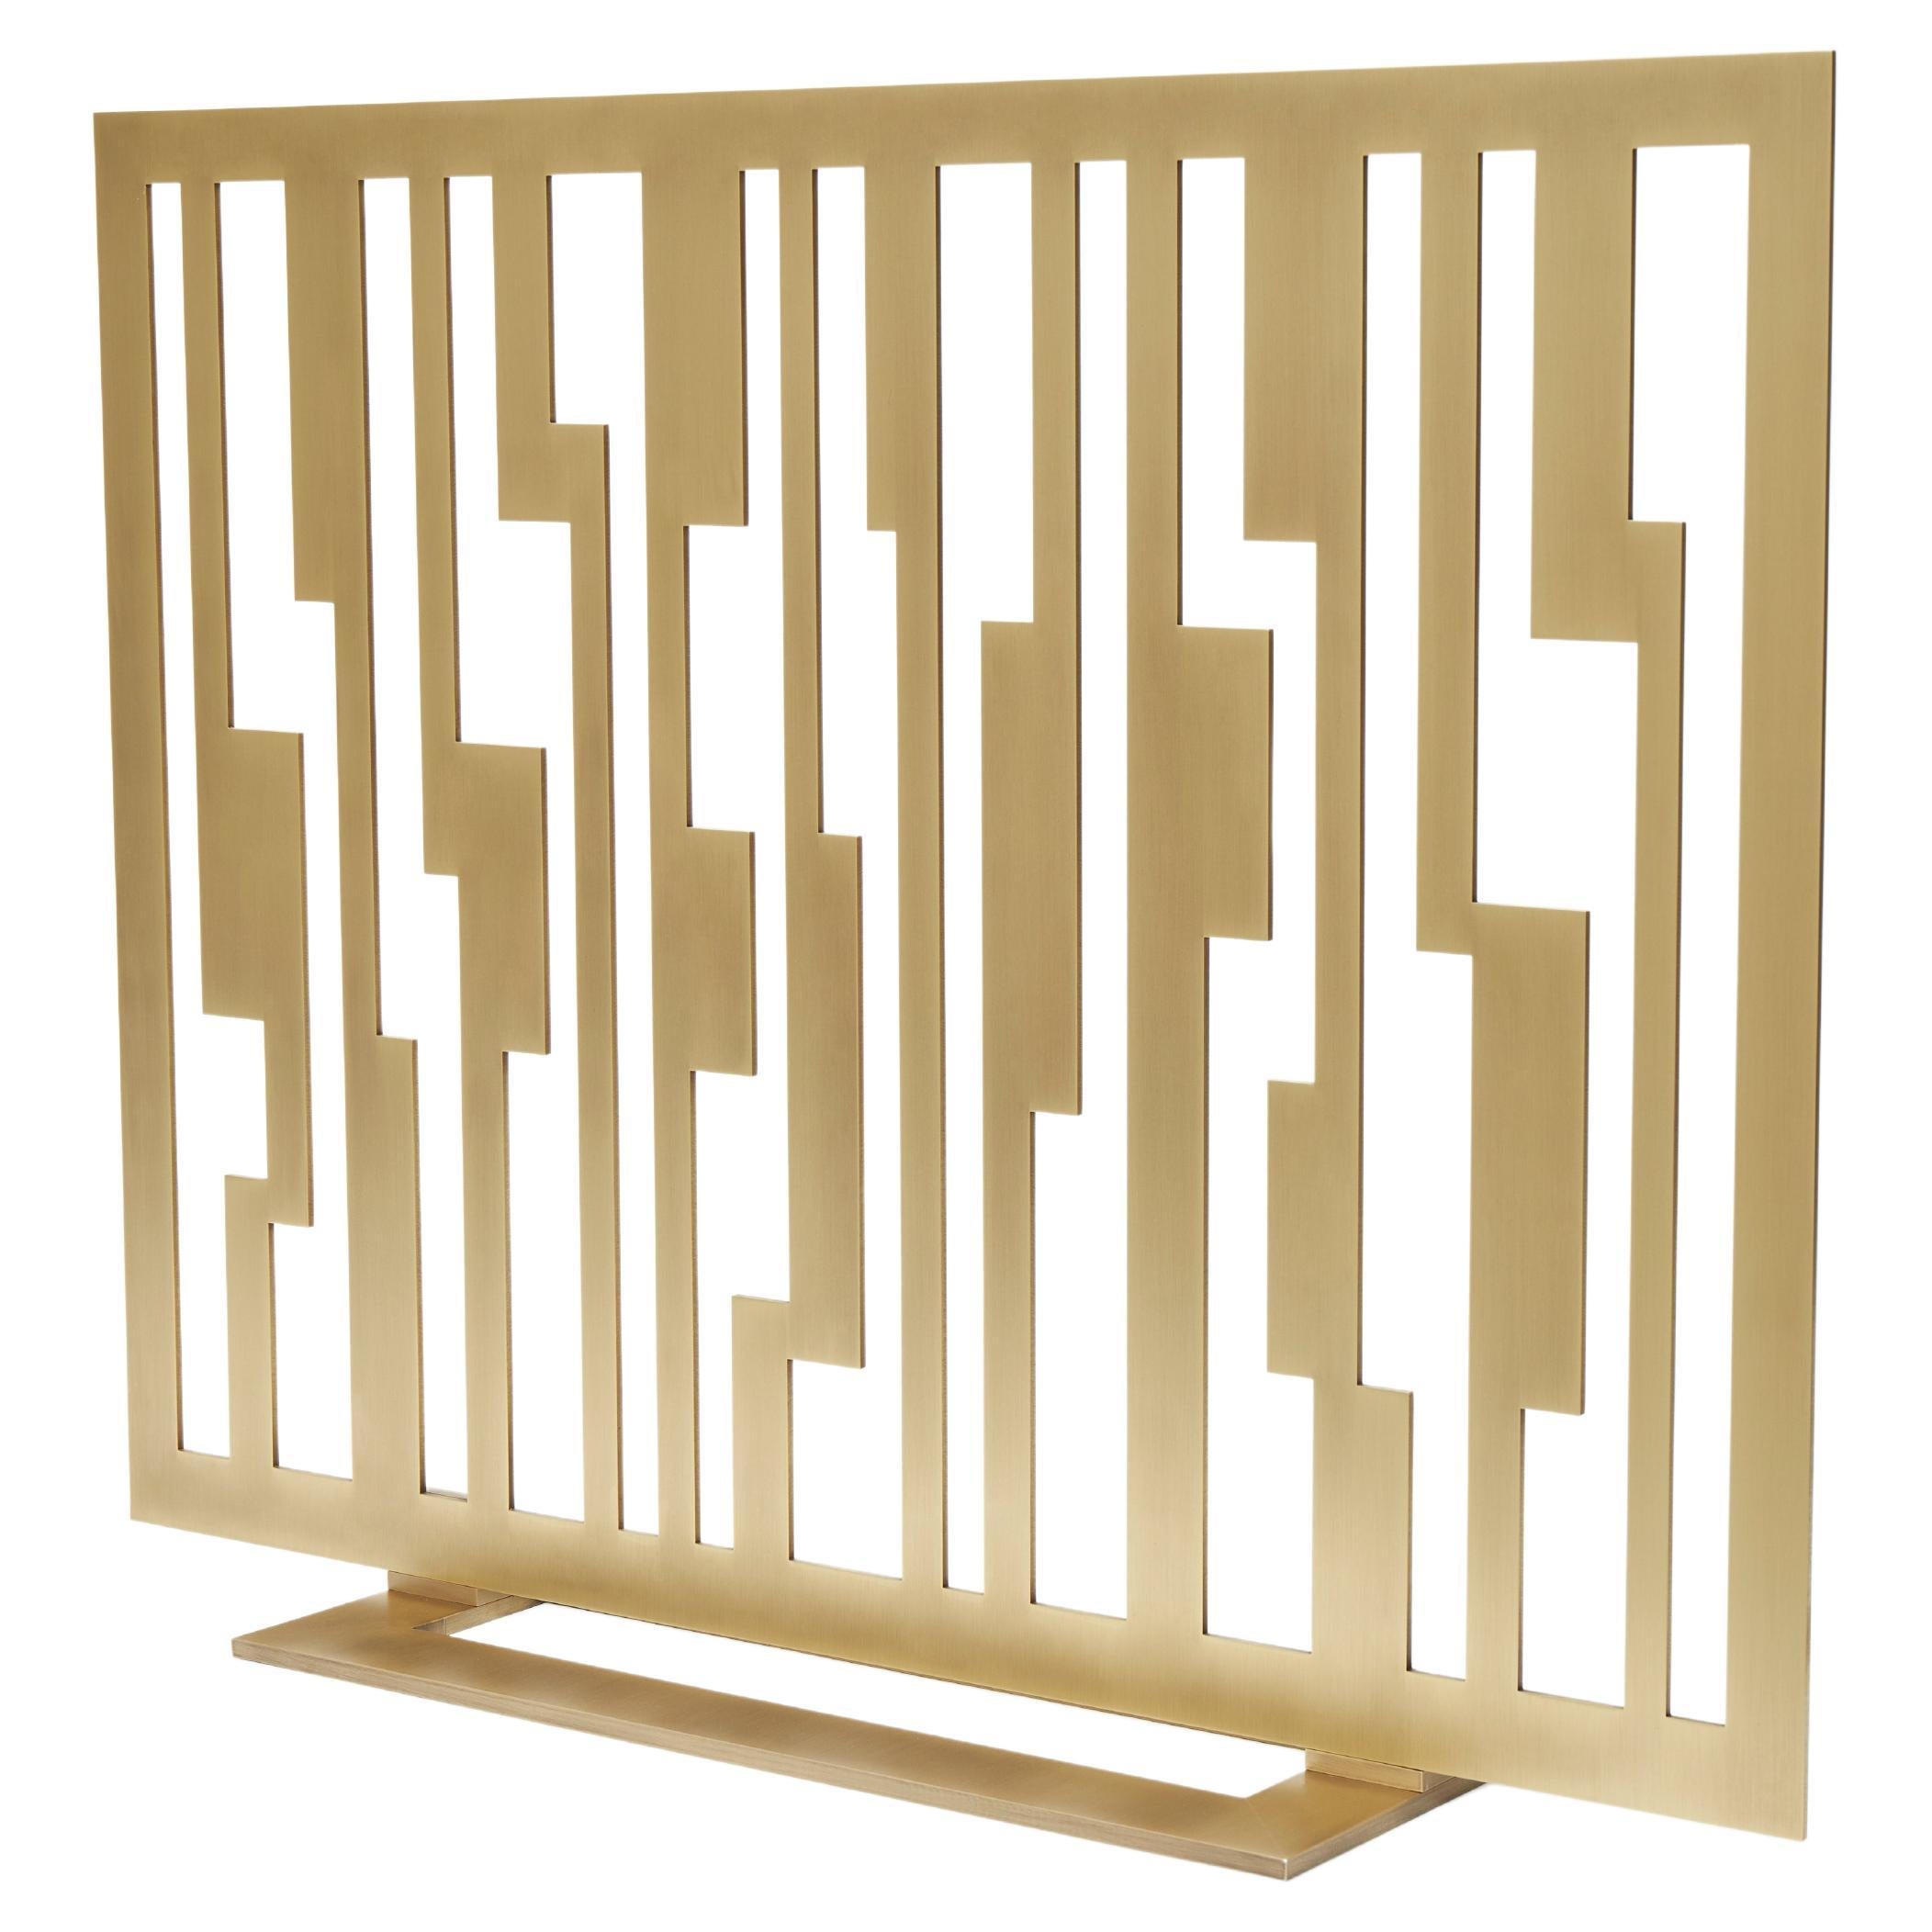 Contemporary Fireplace Screen "Adranus" in Brass with Linear Pattern, by Anaktae